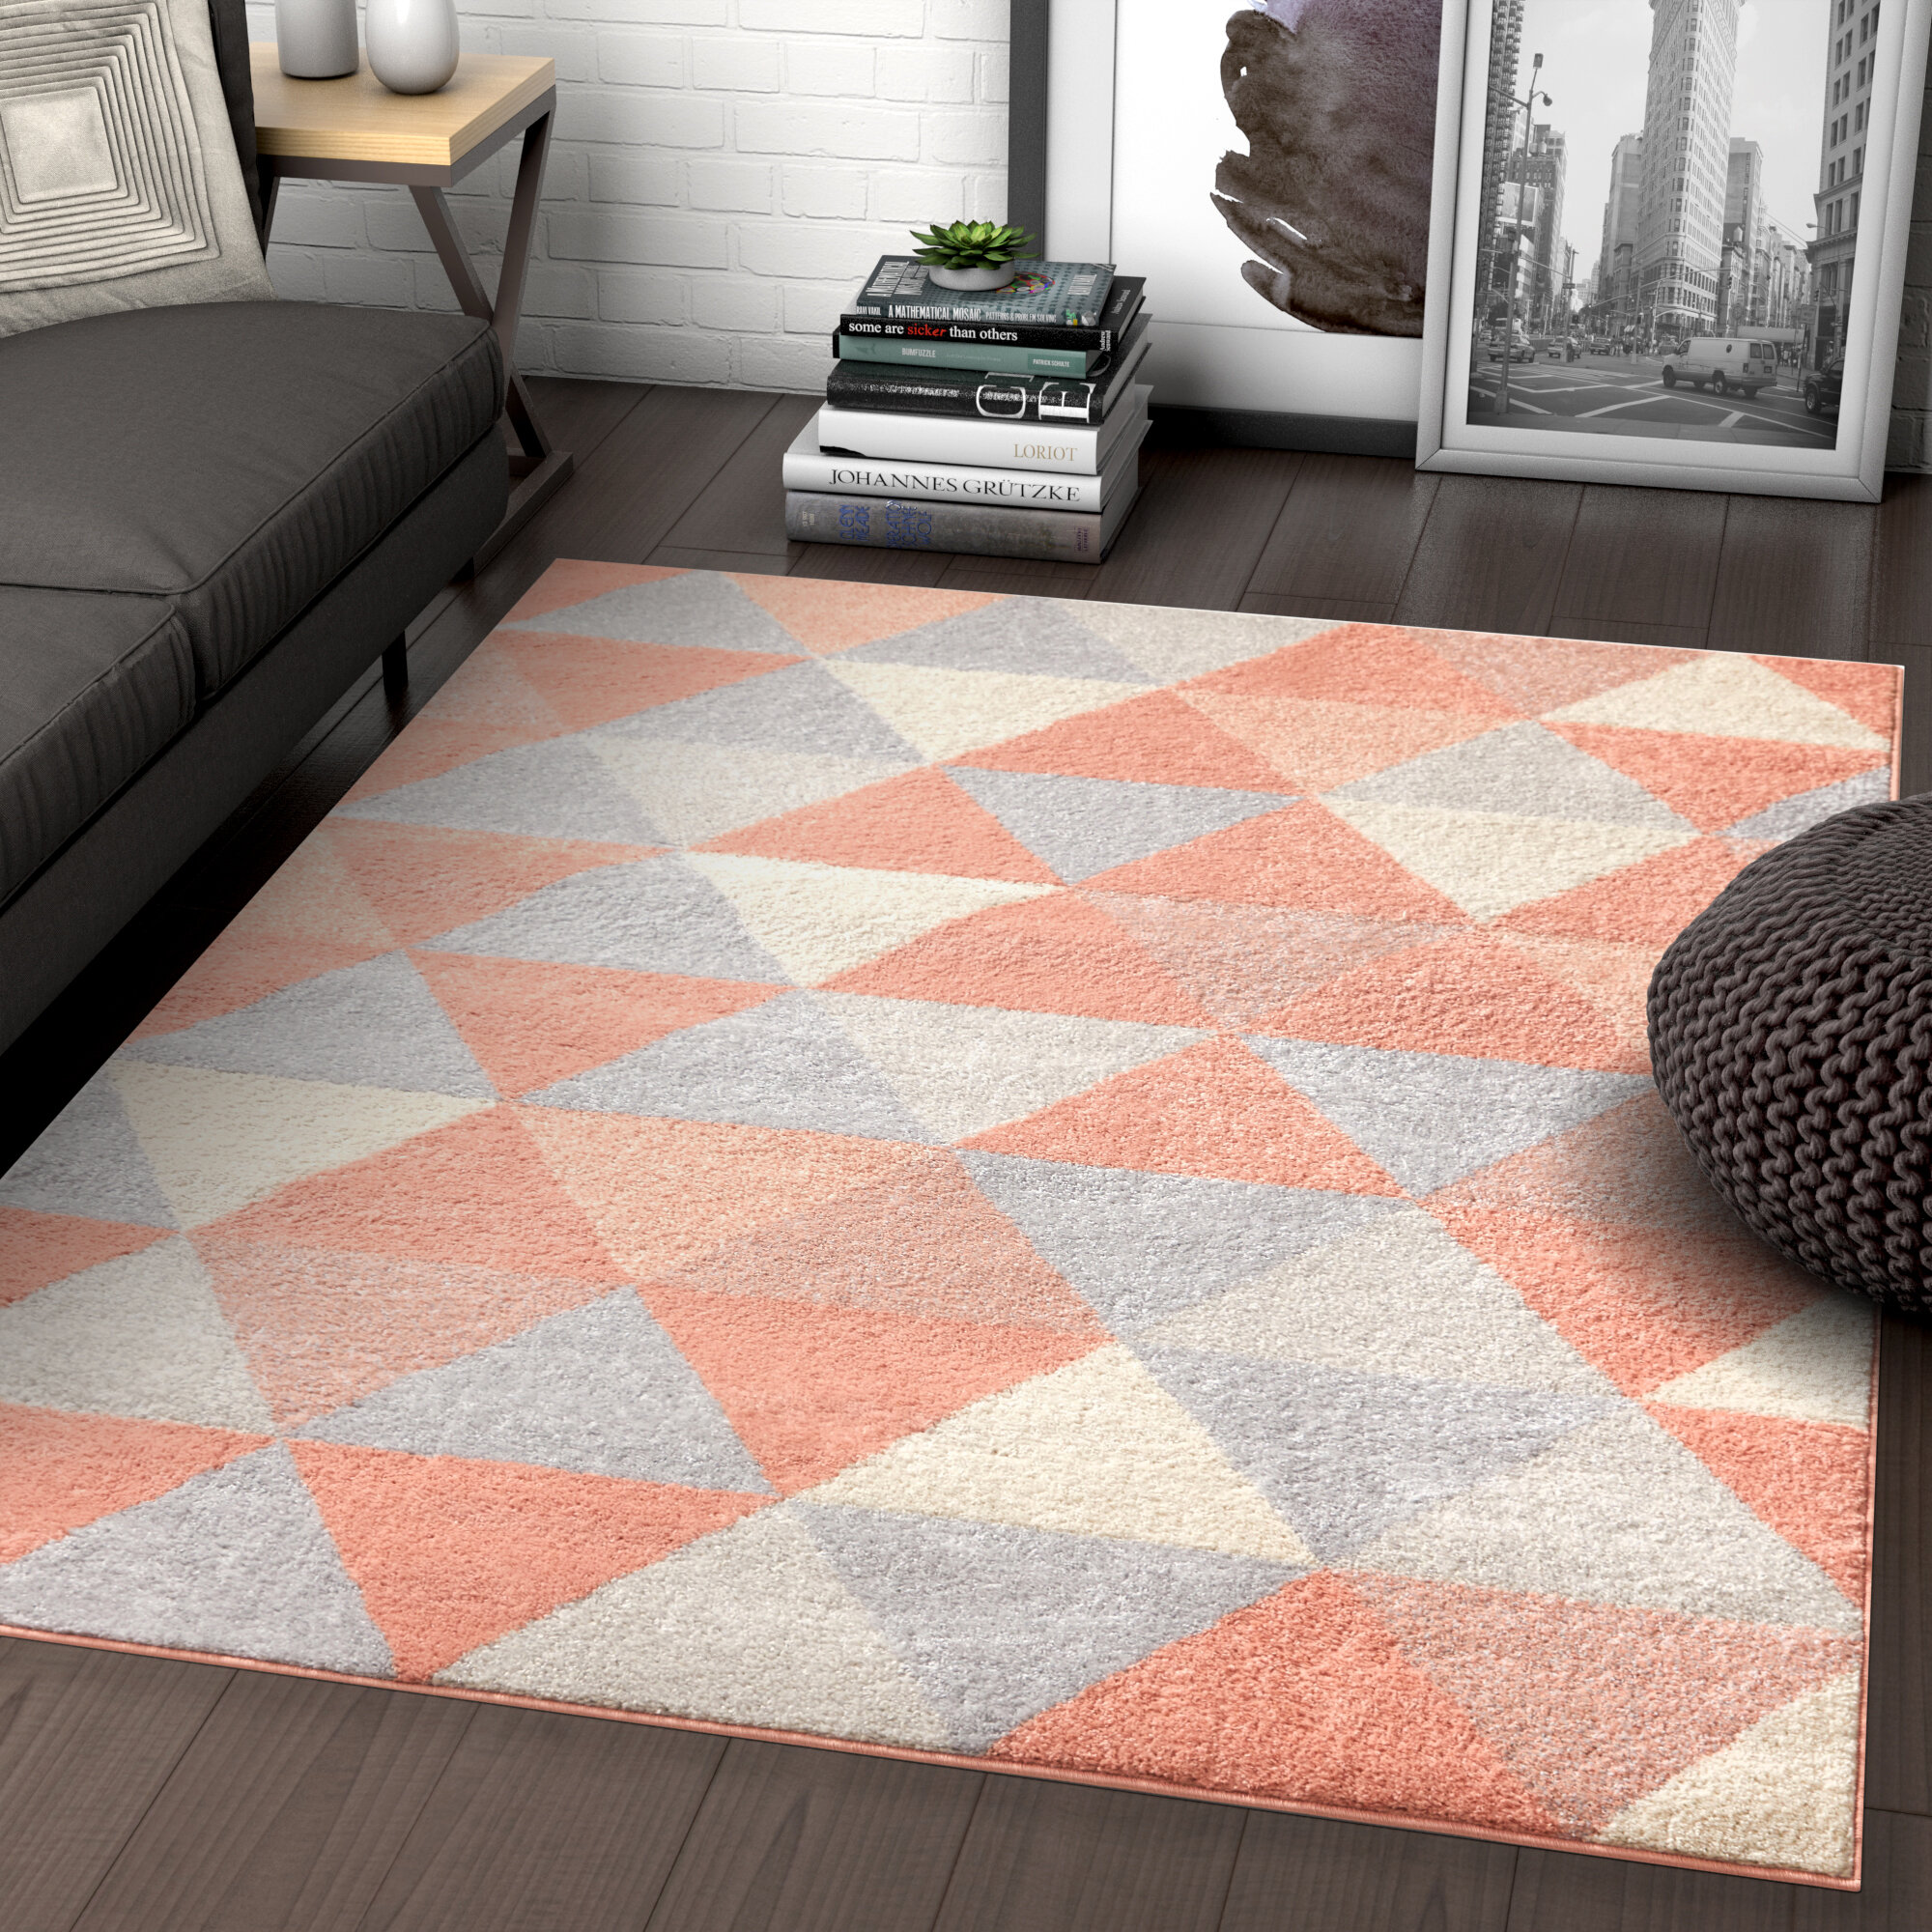 Coral Pink Modern Funky Striped Rug Soft Non Shed Blush Grey Geometric Rugs New 